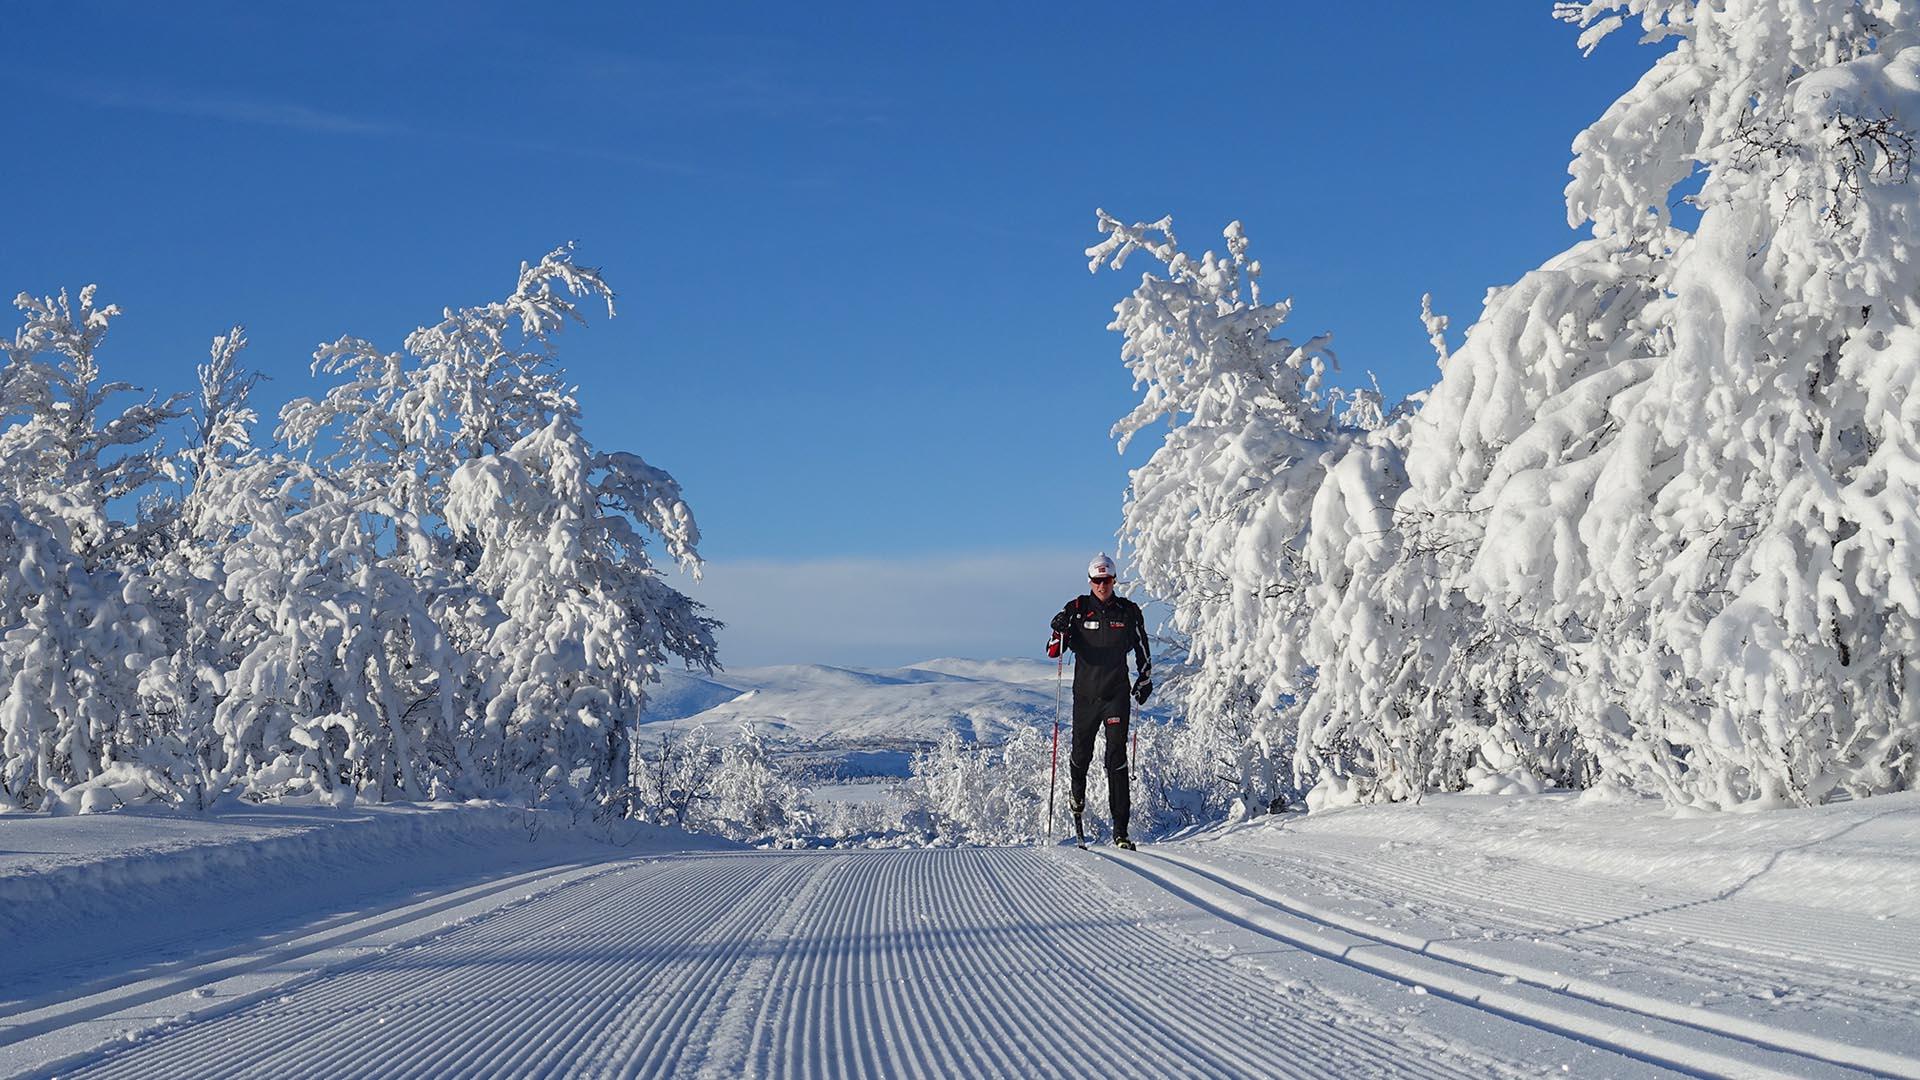 Man on cross country skis between snow covered trees.